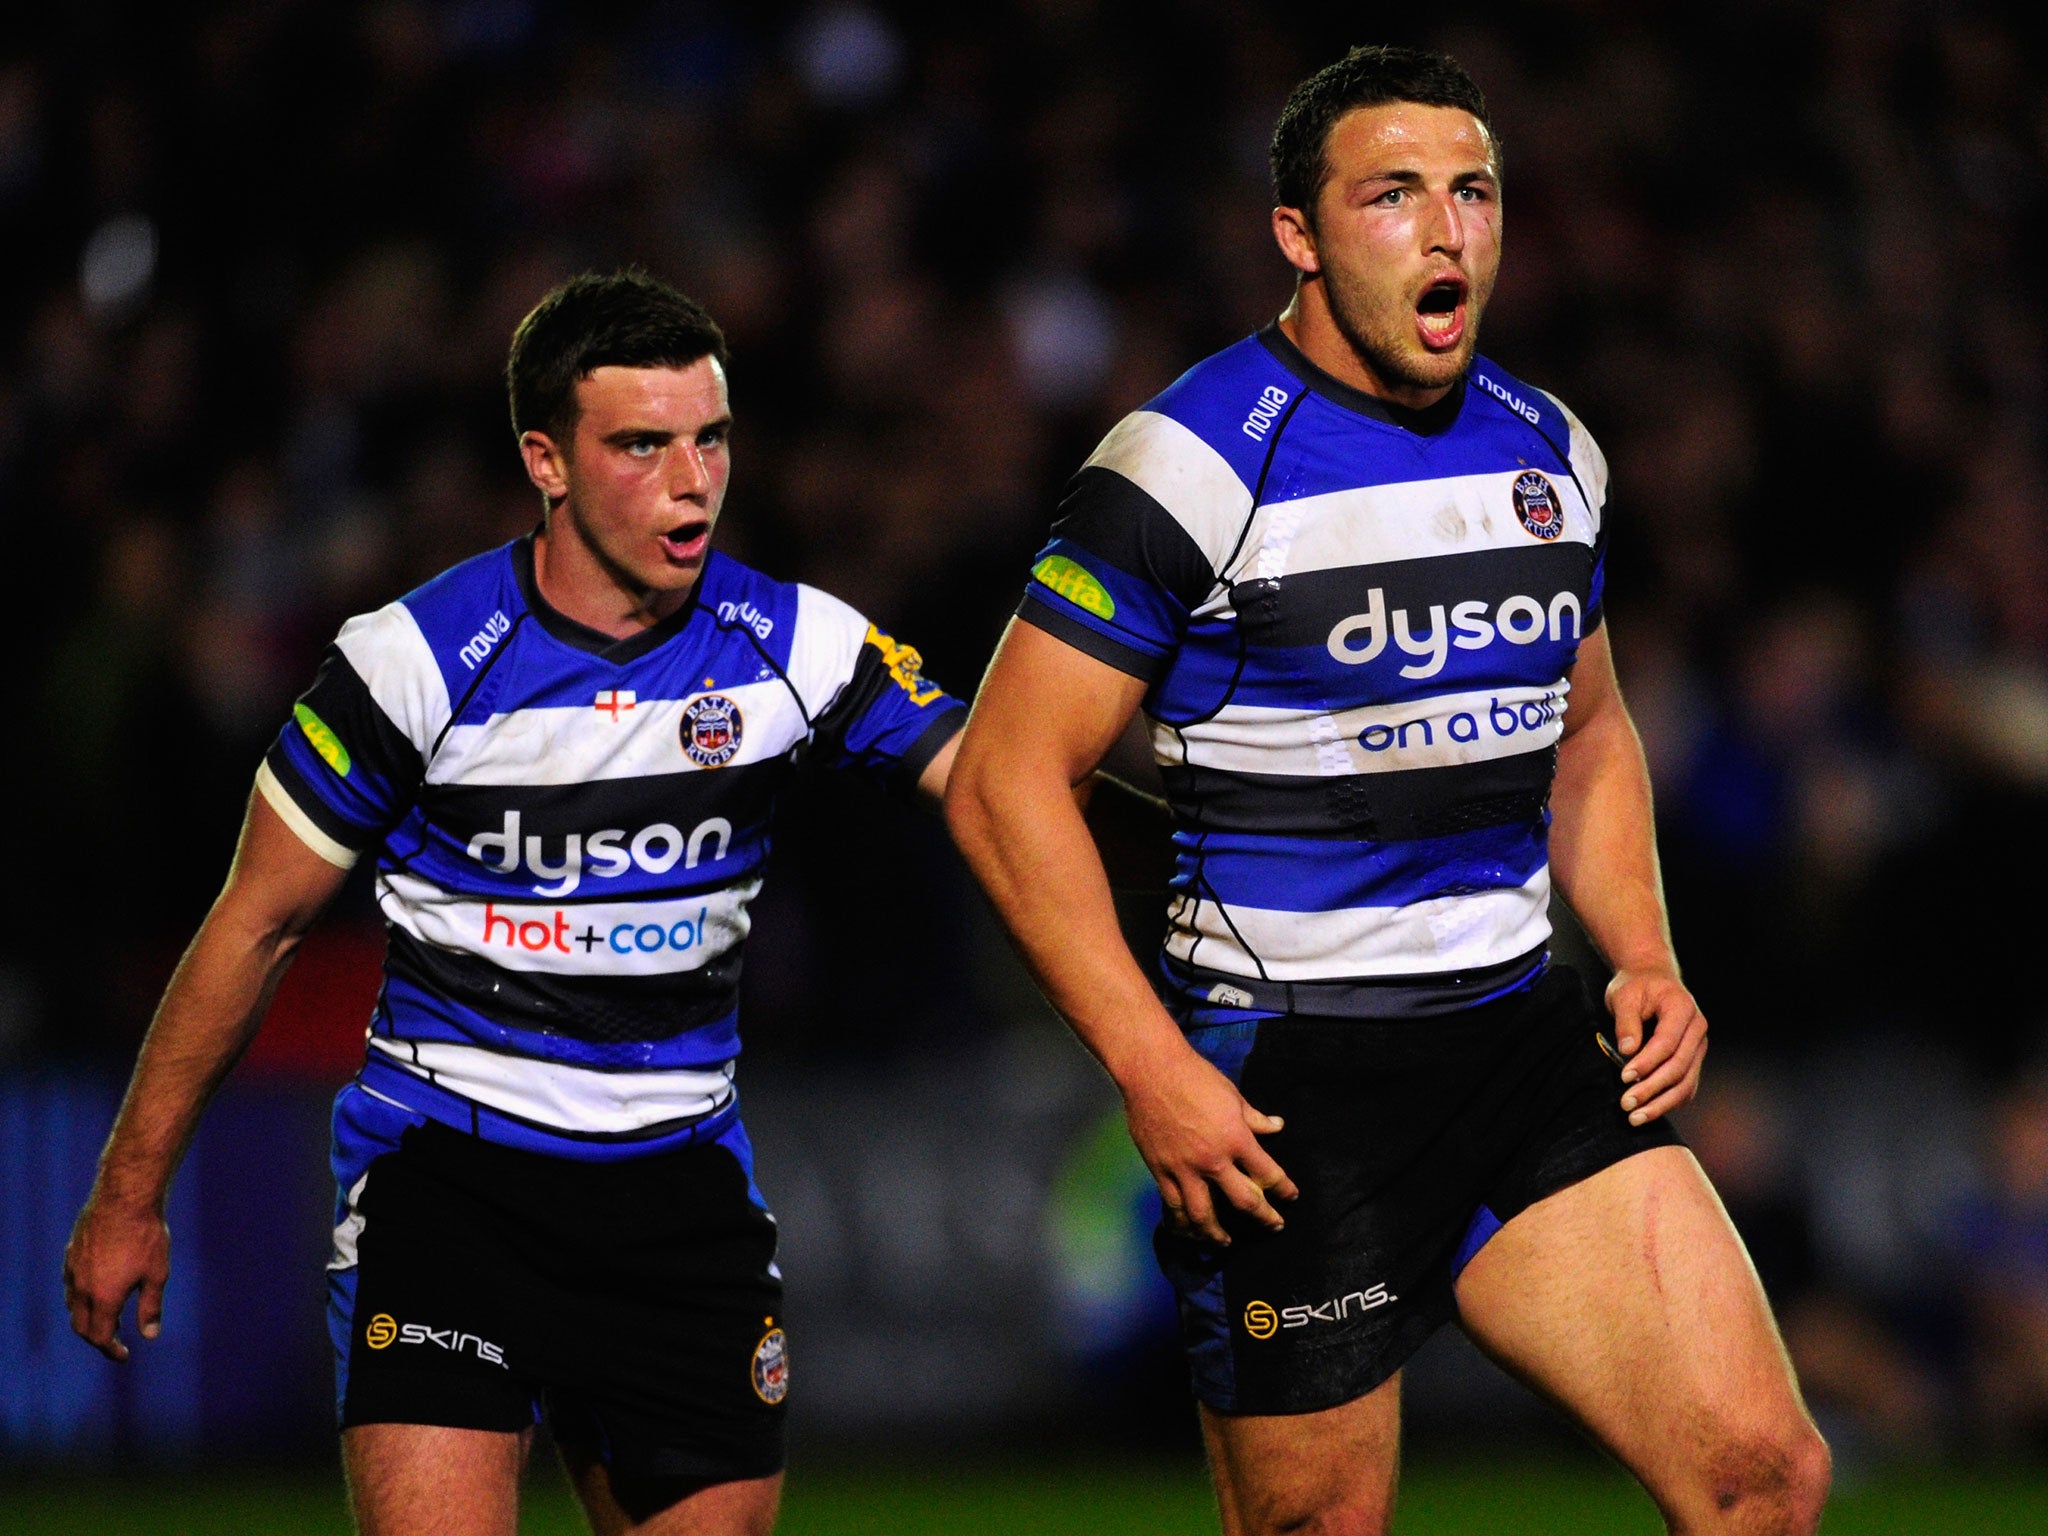 George Ford and Sam Burgess in action for Bath